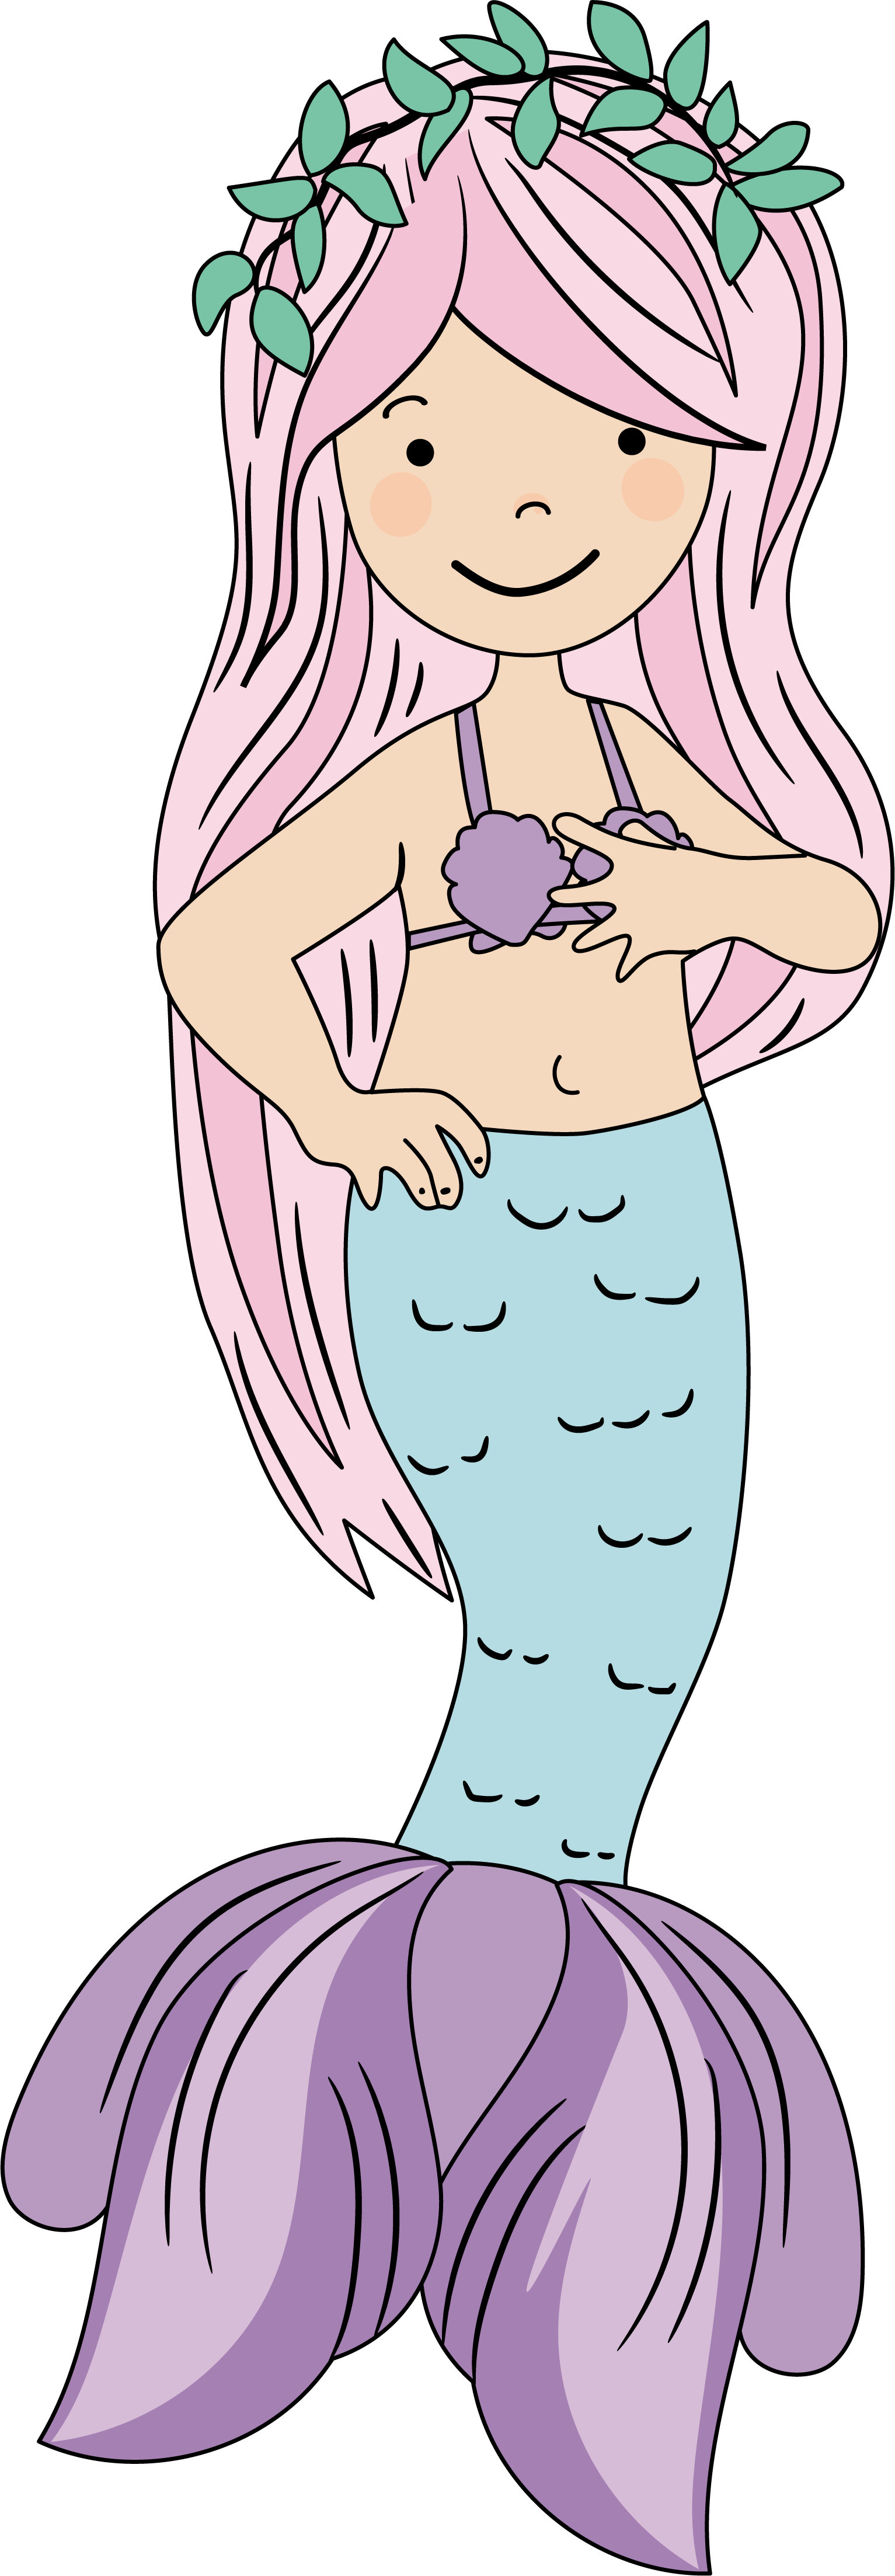 A small mermaid with a green tail.